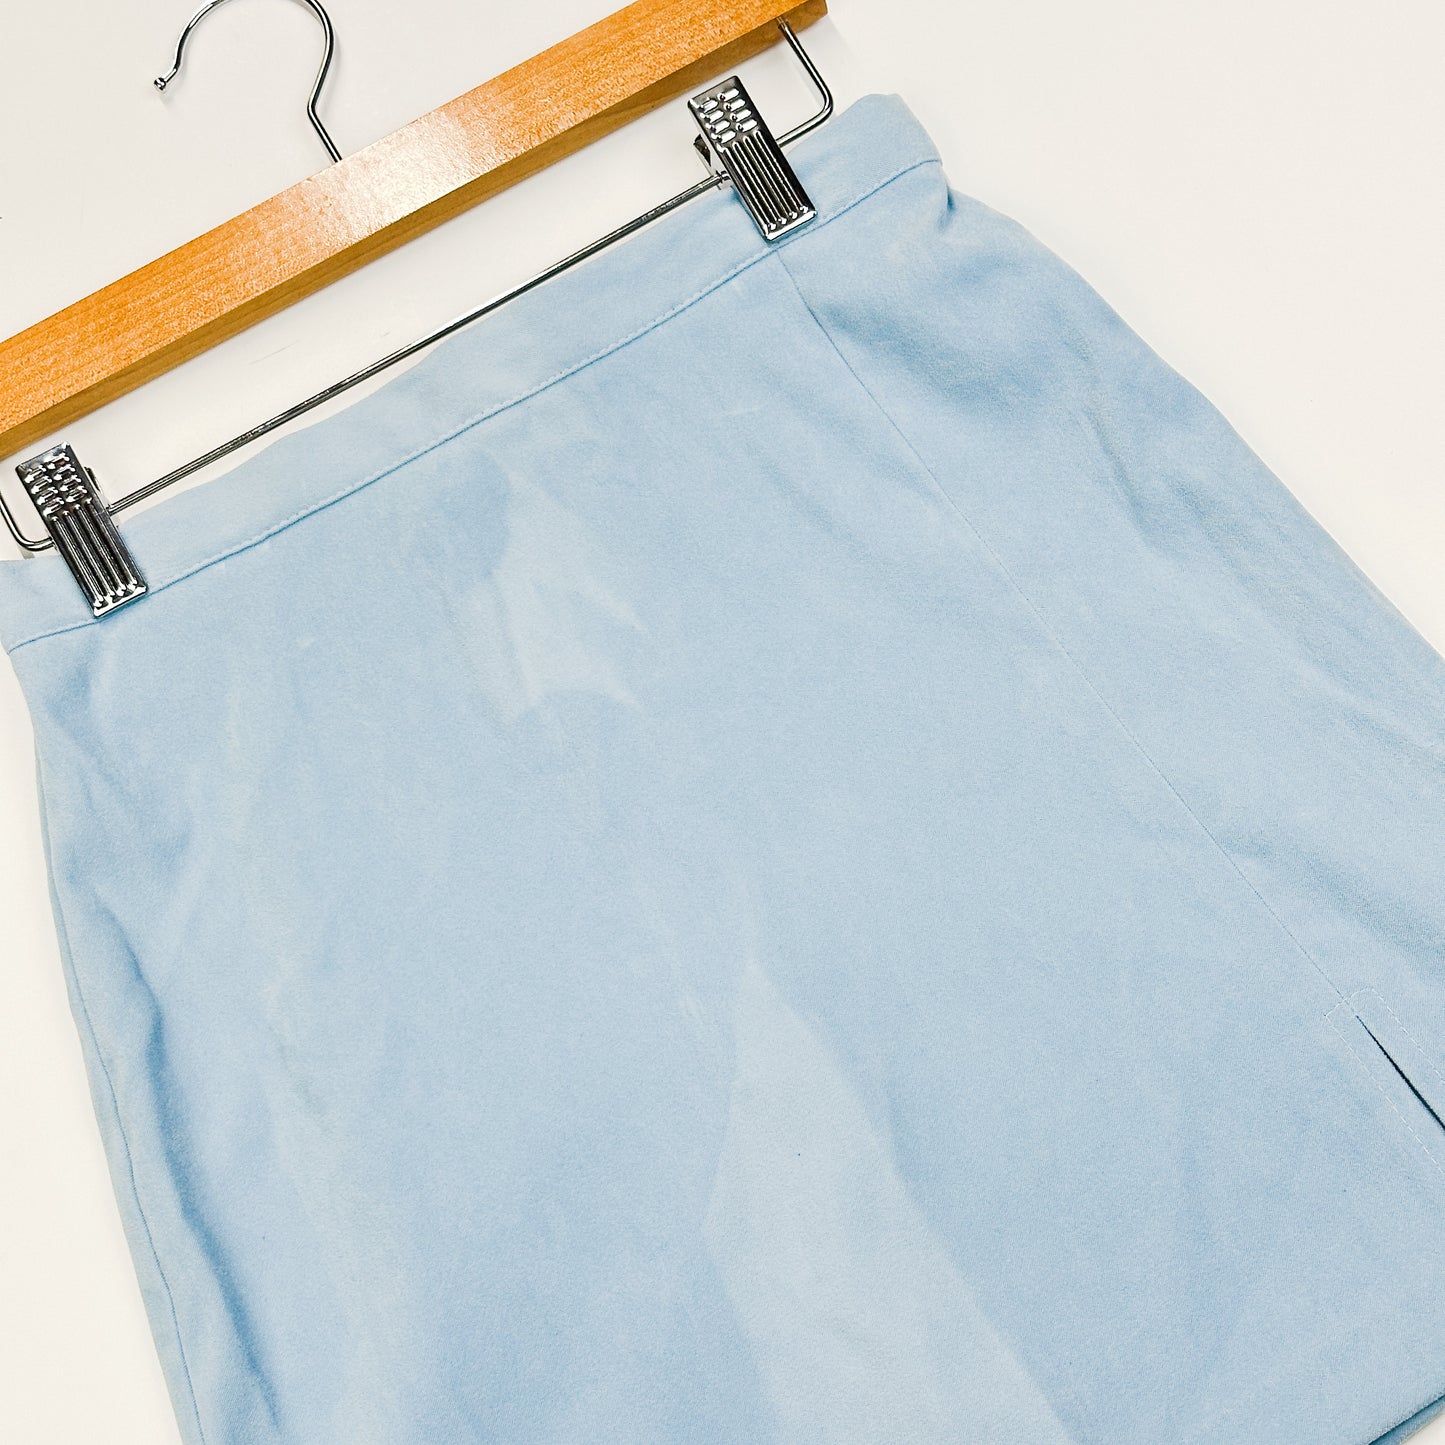 Vintage Kids High Waisted Baby Blue Skirt - Size 10yr